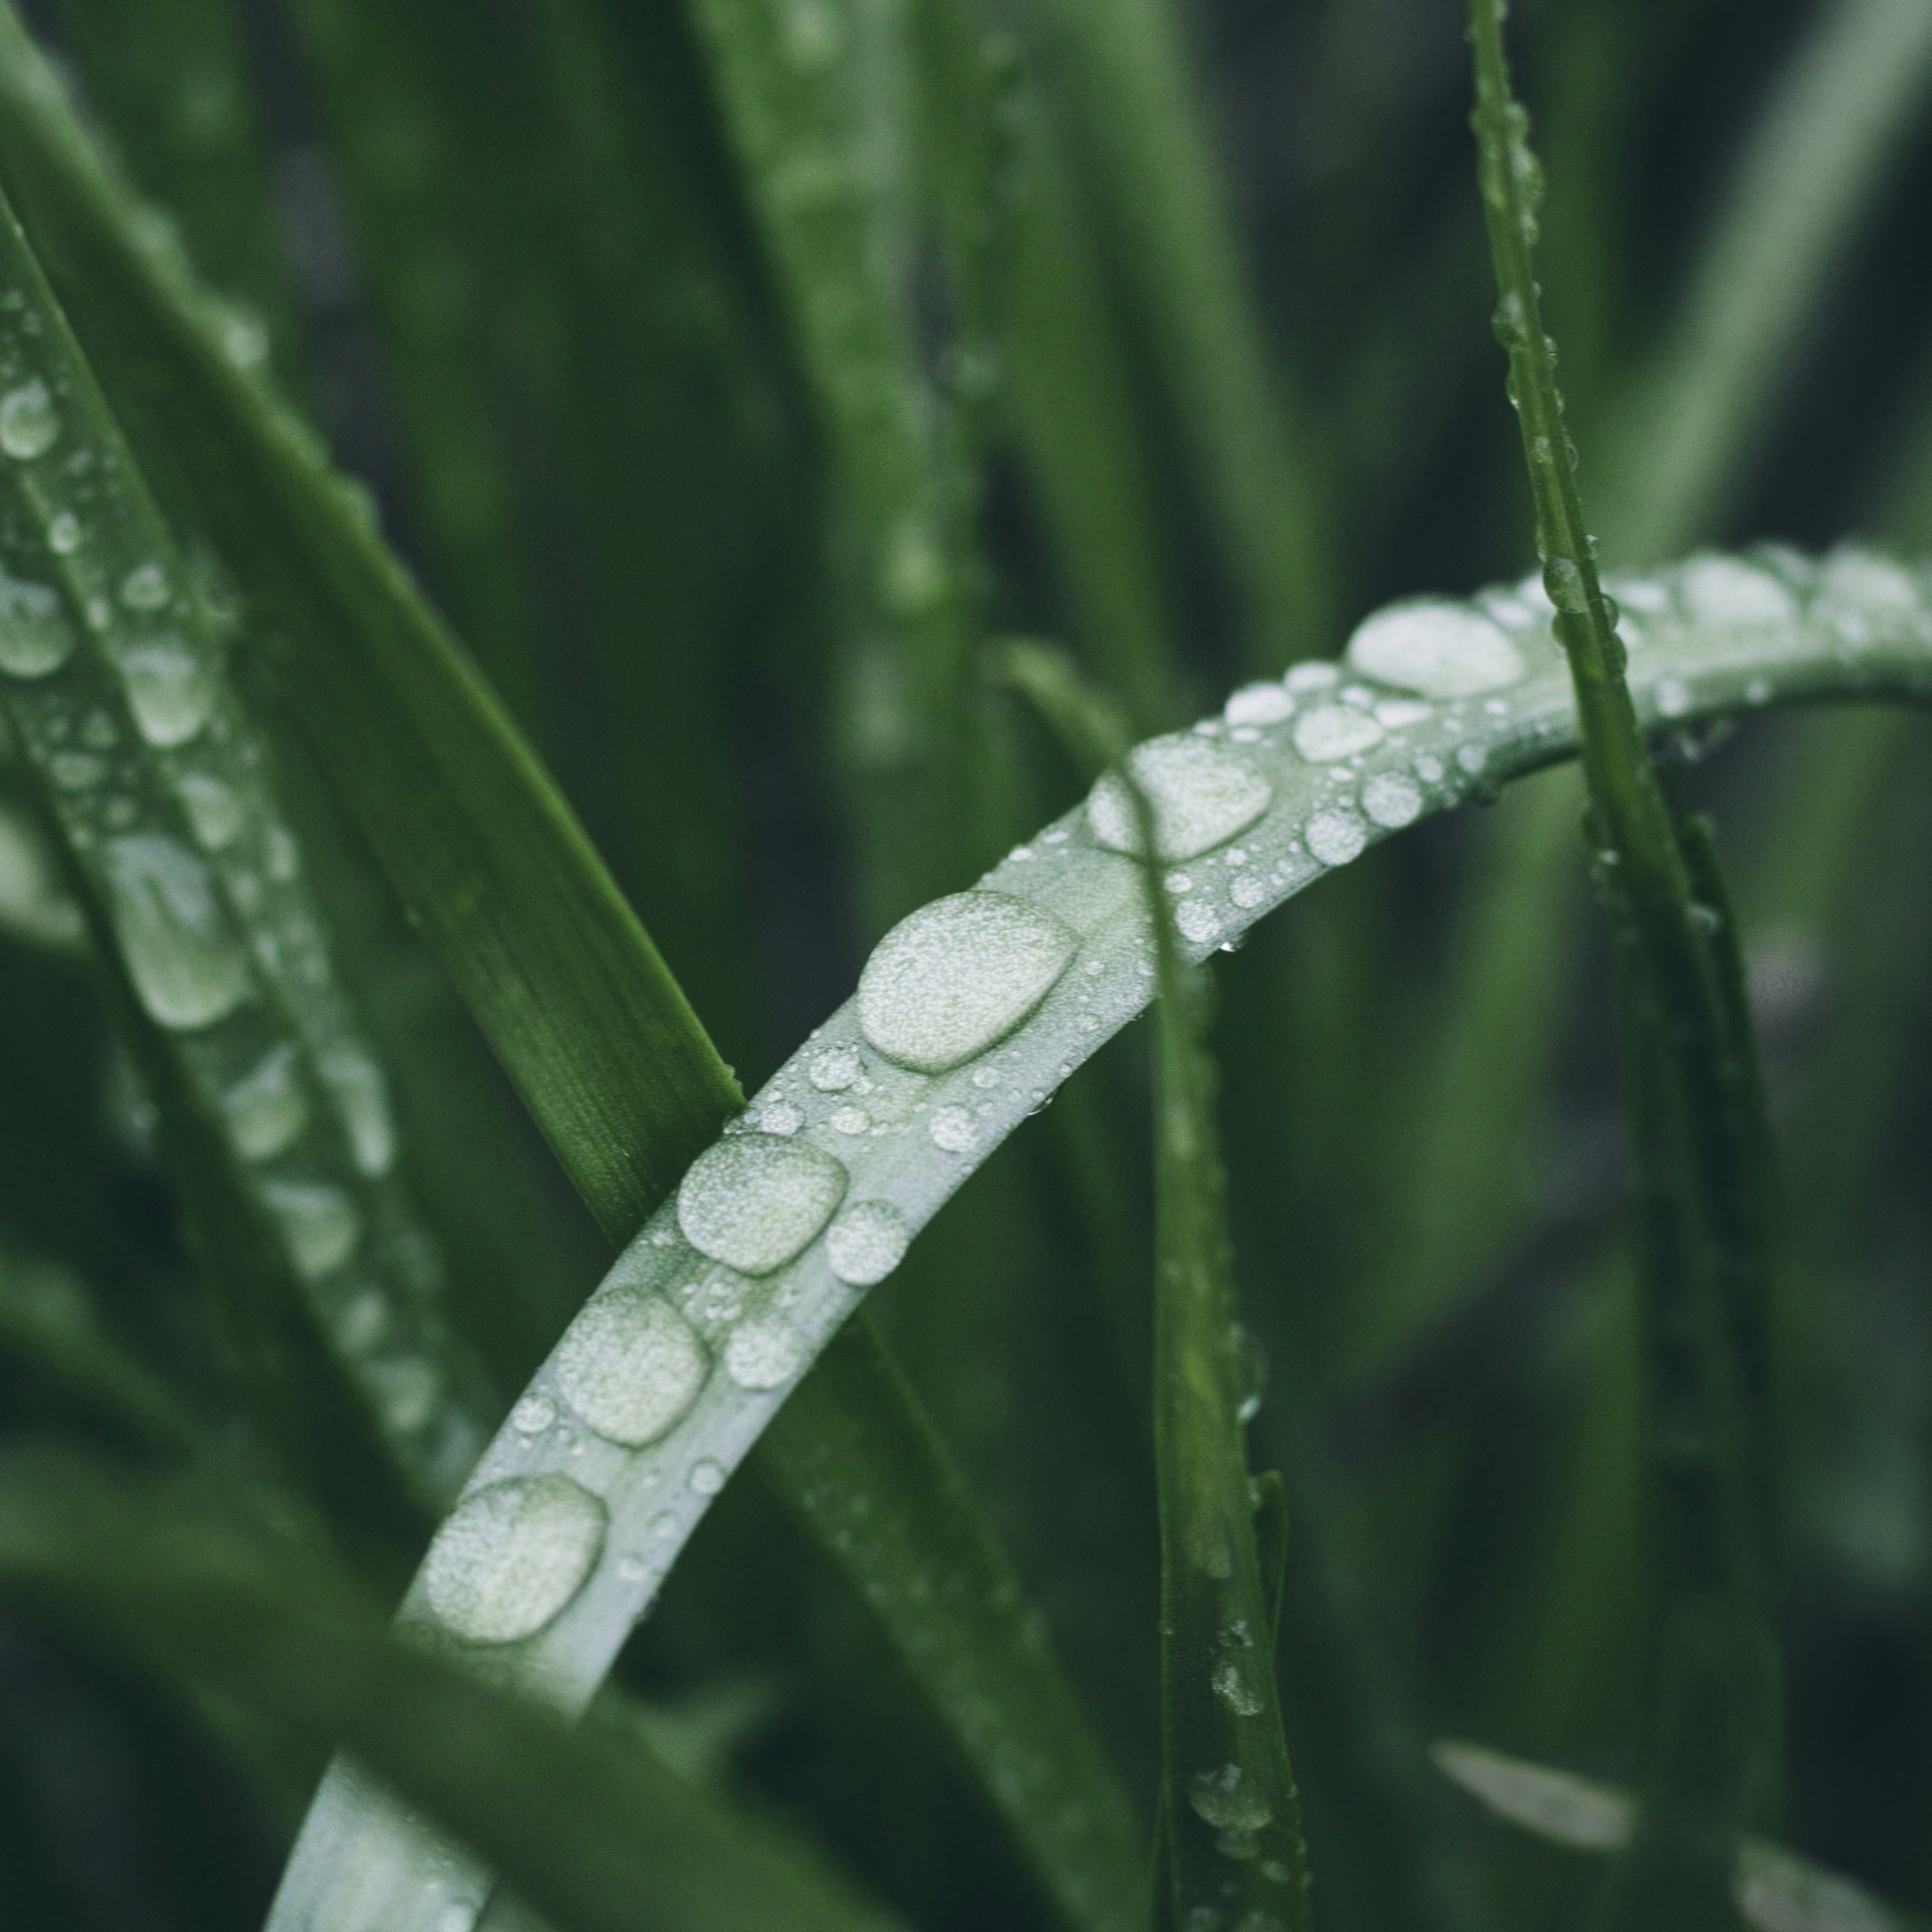 Dew drops on lemongrass, taken early in the morning. First shot from my new Nikon camera